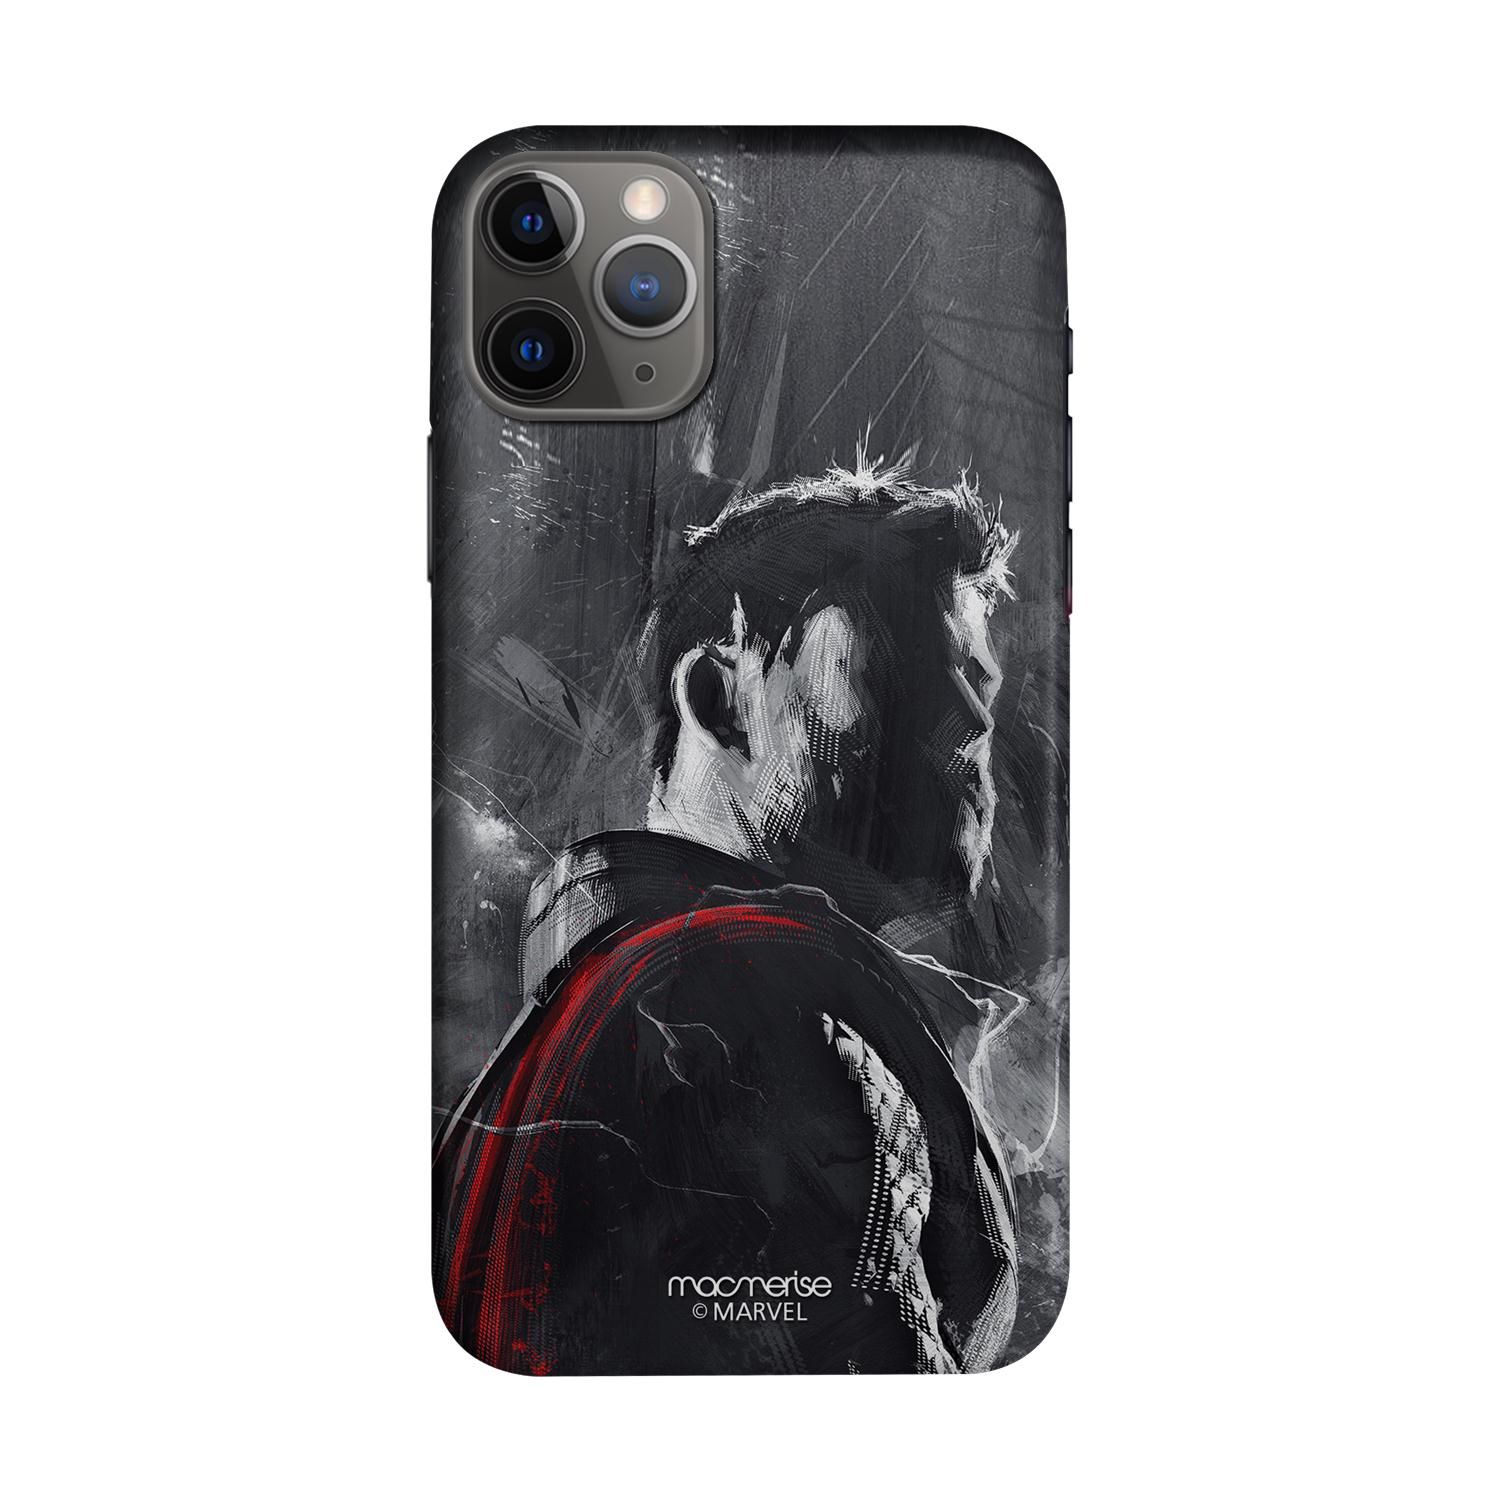 Buy Charcoal Art Thor - Sleek Phone Case for iPhone 11 Pro Max Online